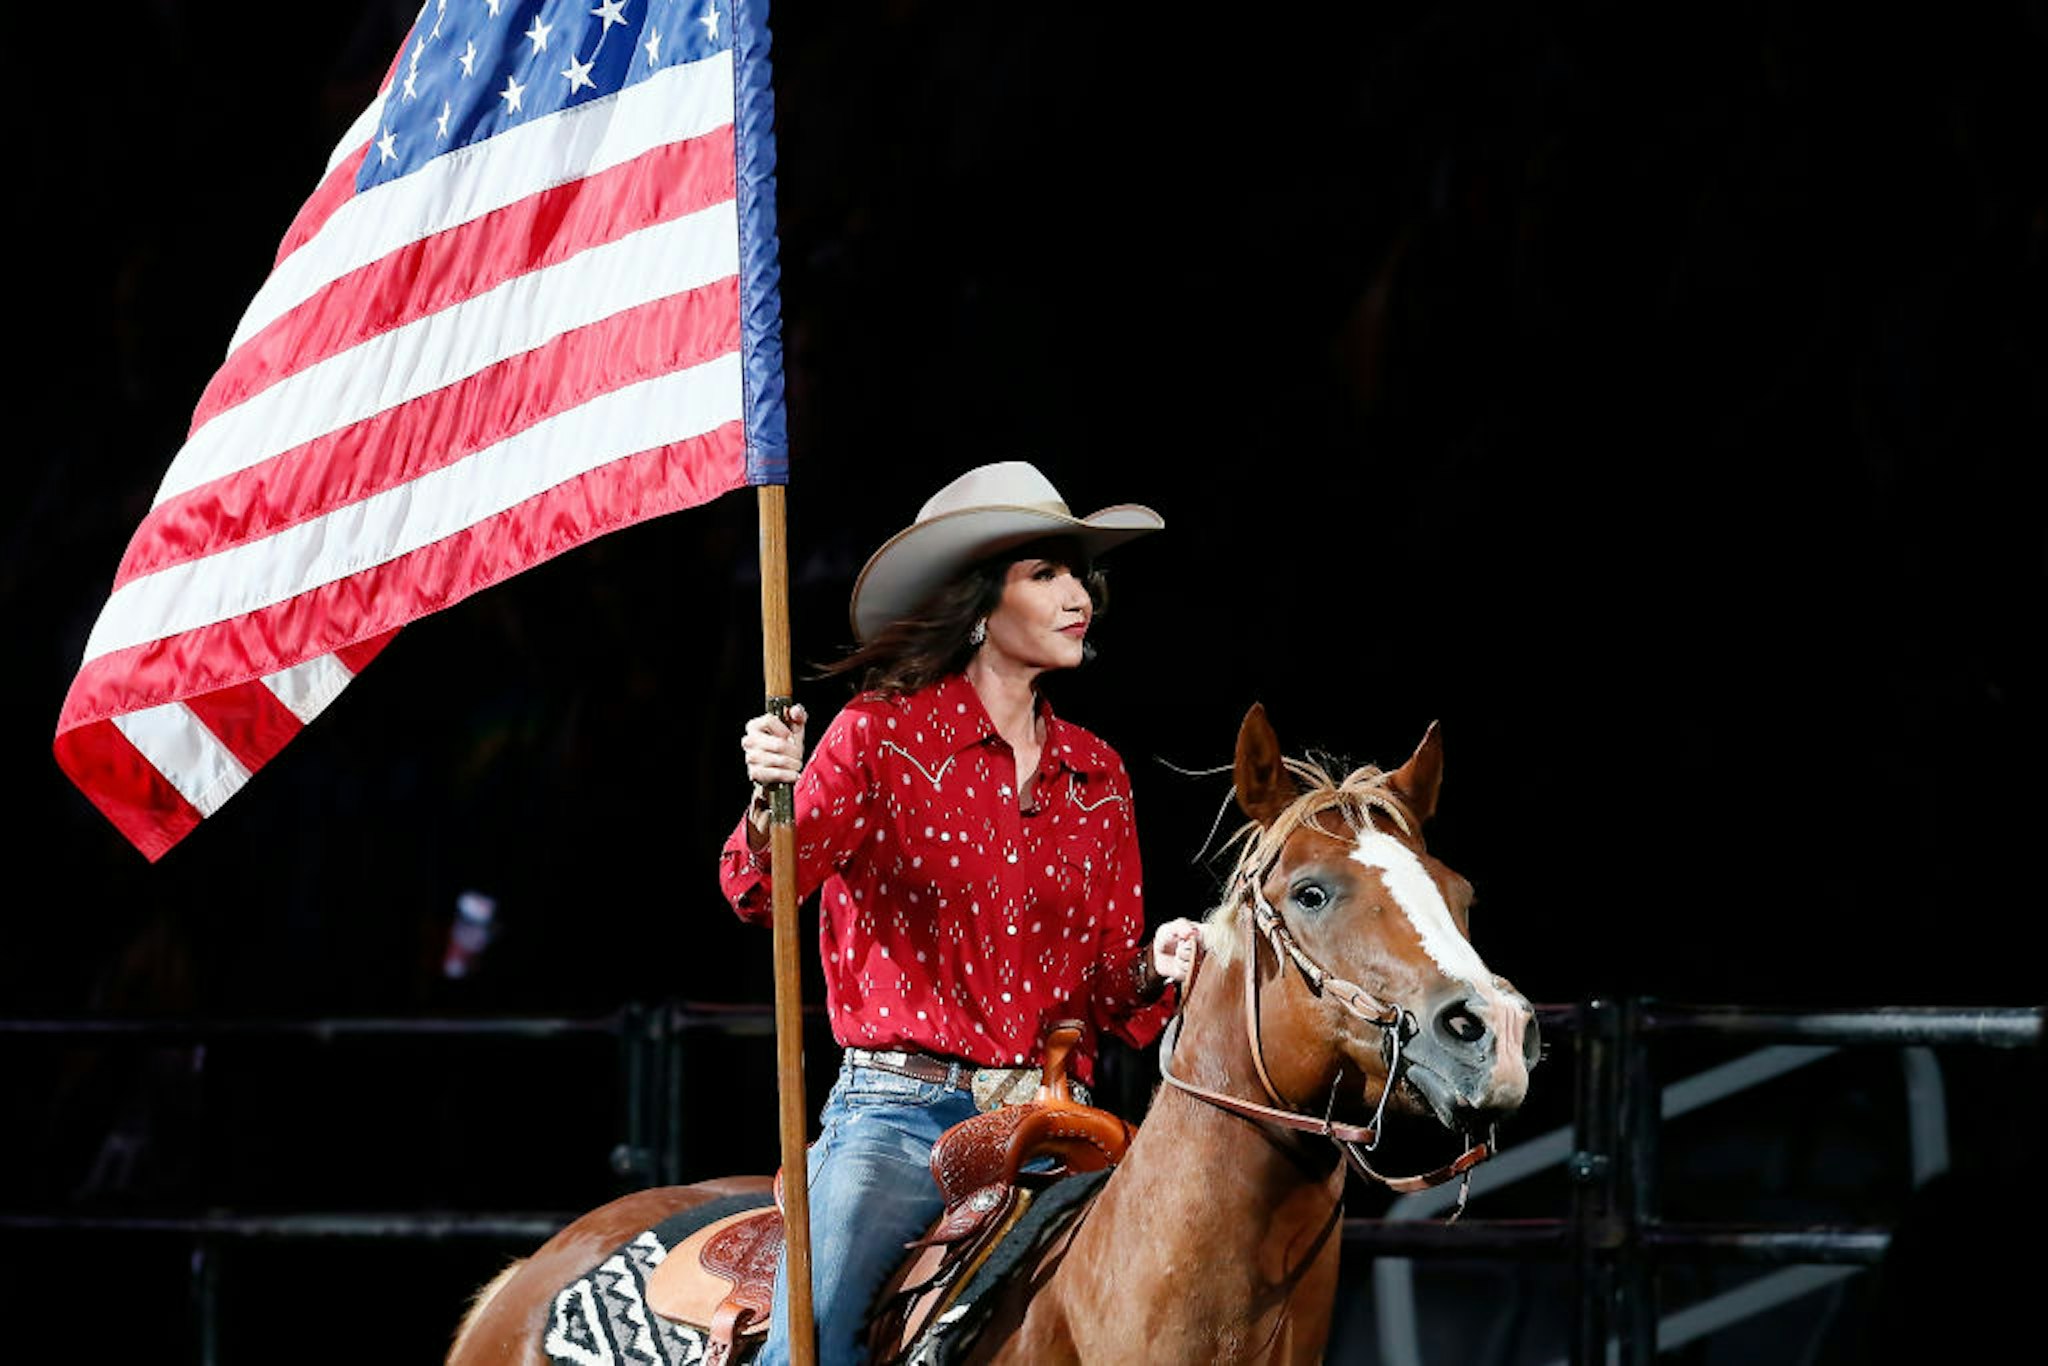 South Dakota's Governor Kristi Noem holds the U.S flag riding a horse during the Monster Energy Team Challenge, on July 11, 2020, at the Denny Sanford PREMIER Center, Sioux Falls, SD.